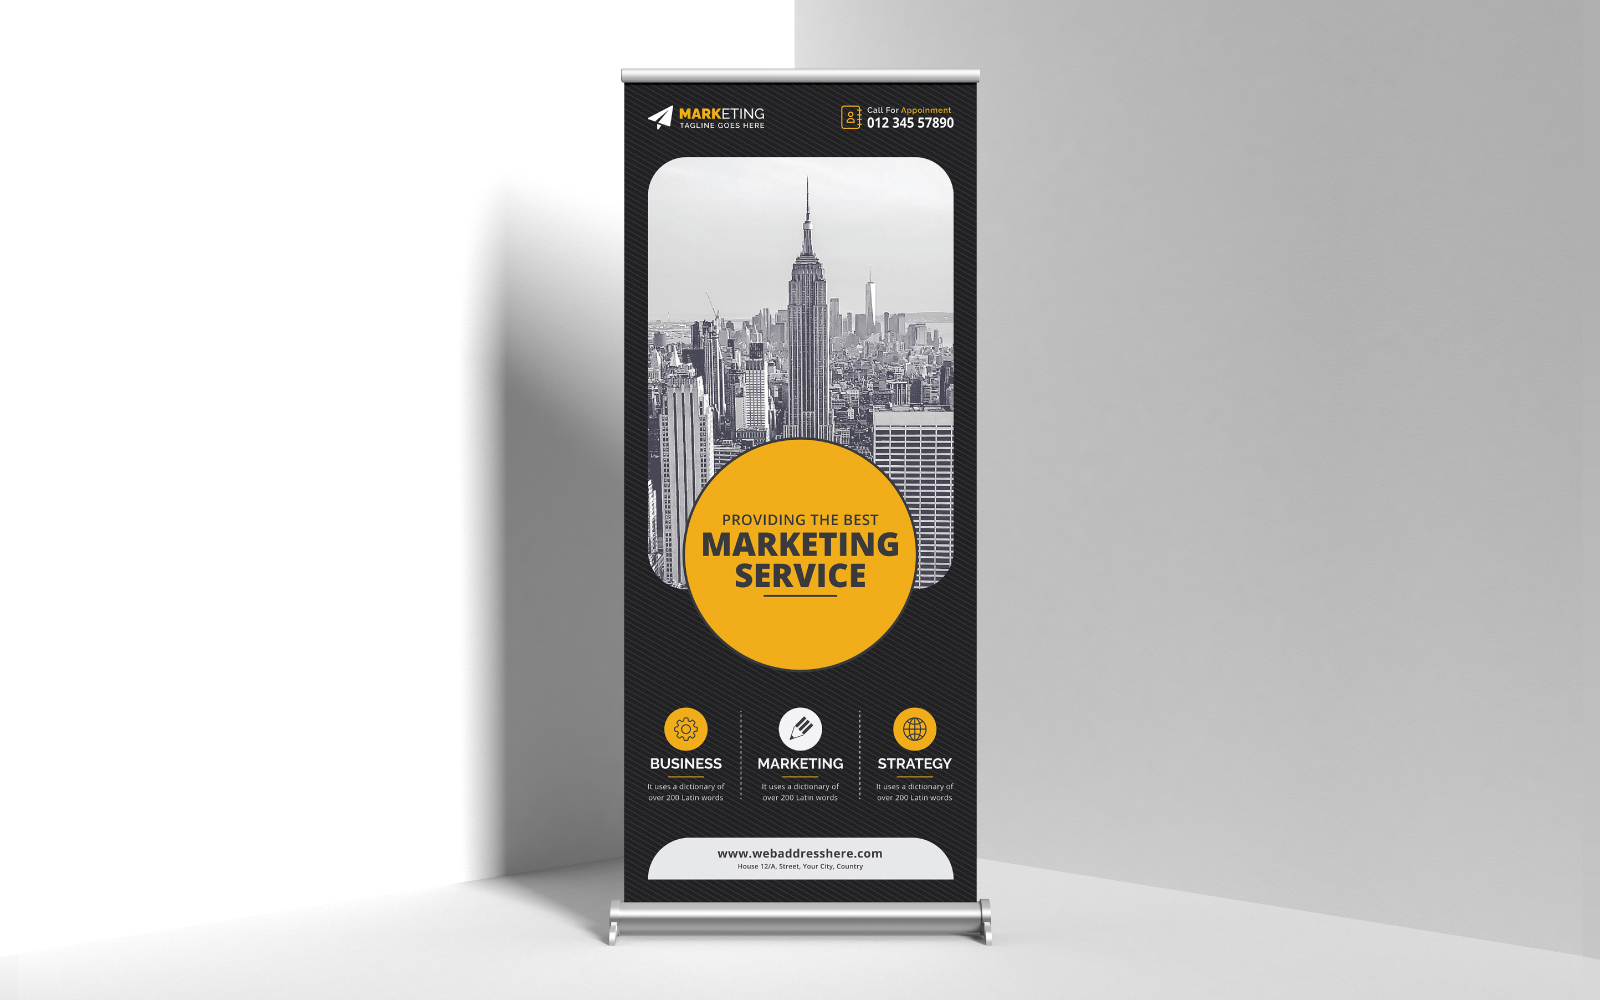 What Is A Mockup? - Ultimate Marketing Dictionary